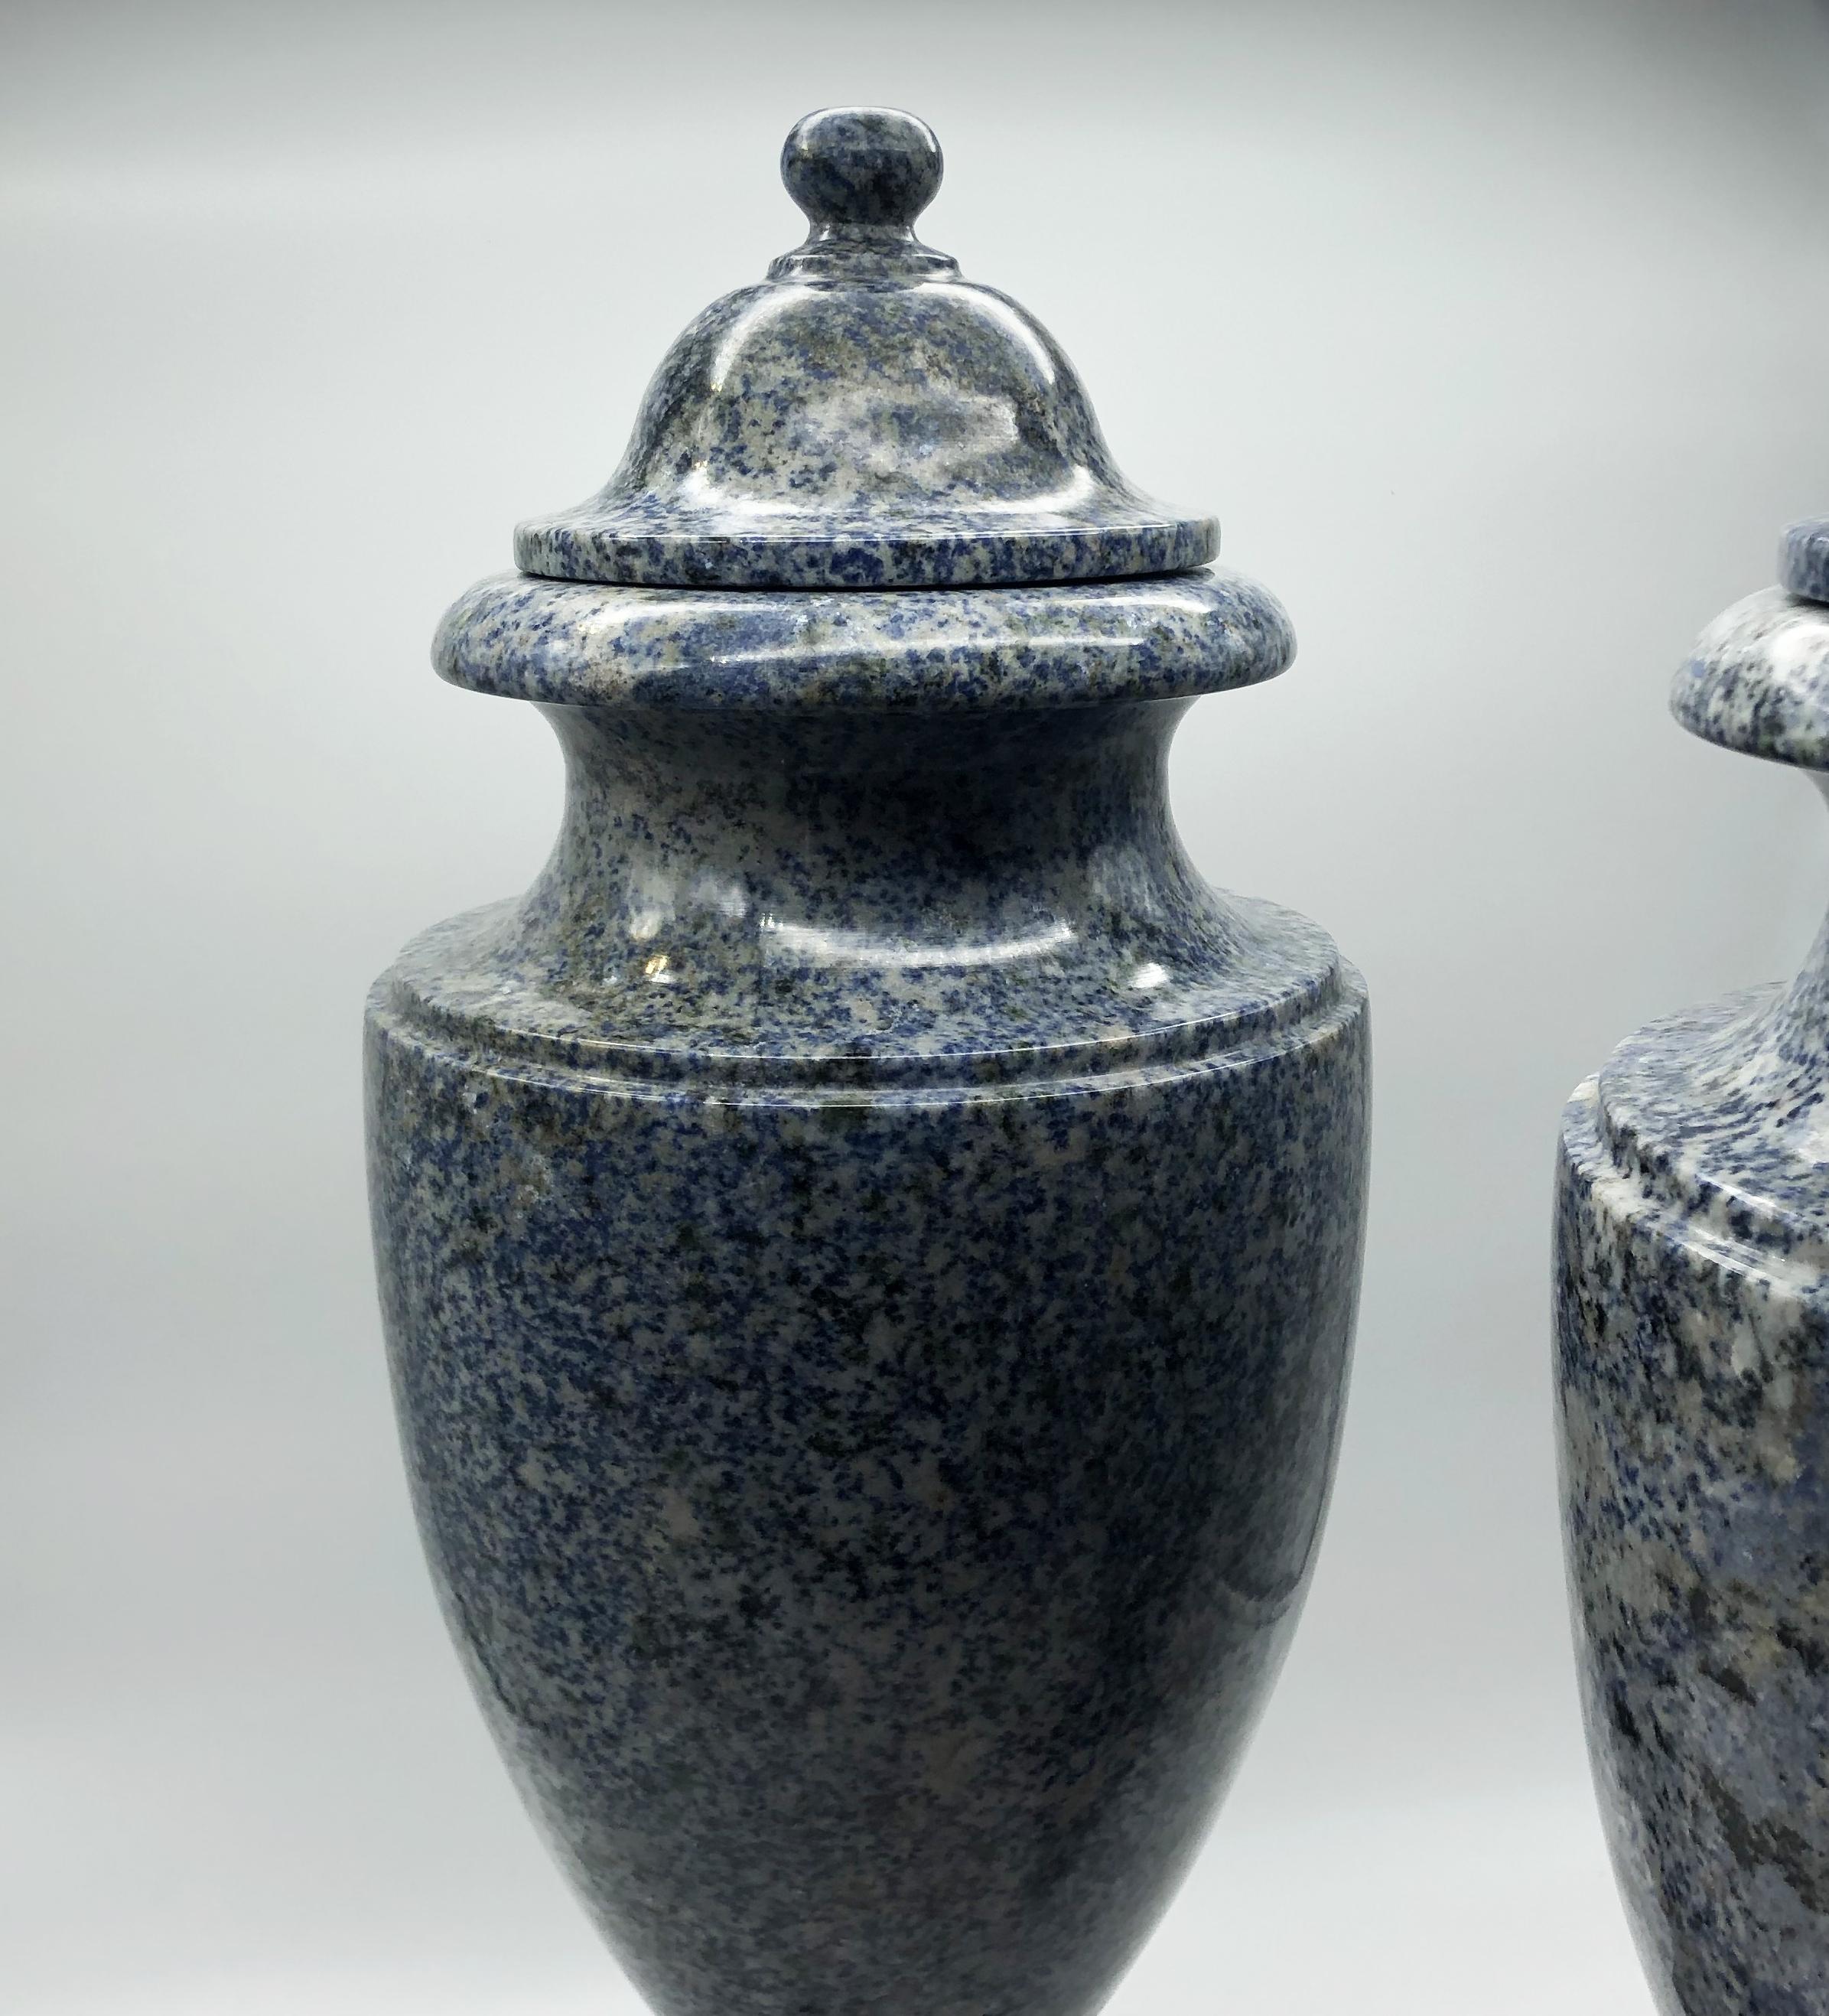 An impressive pair of blue Italian neoclassical vases made in one of the most beautiful stone the Azul Baiha, similar and strong than granite but with a small different of the colour that is unique, and black and gray and white point inside. The